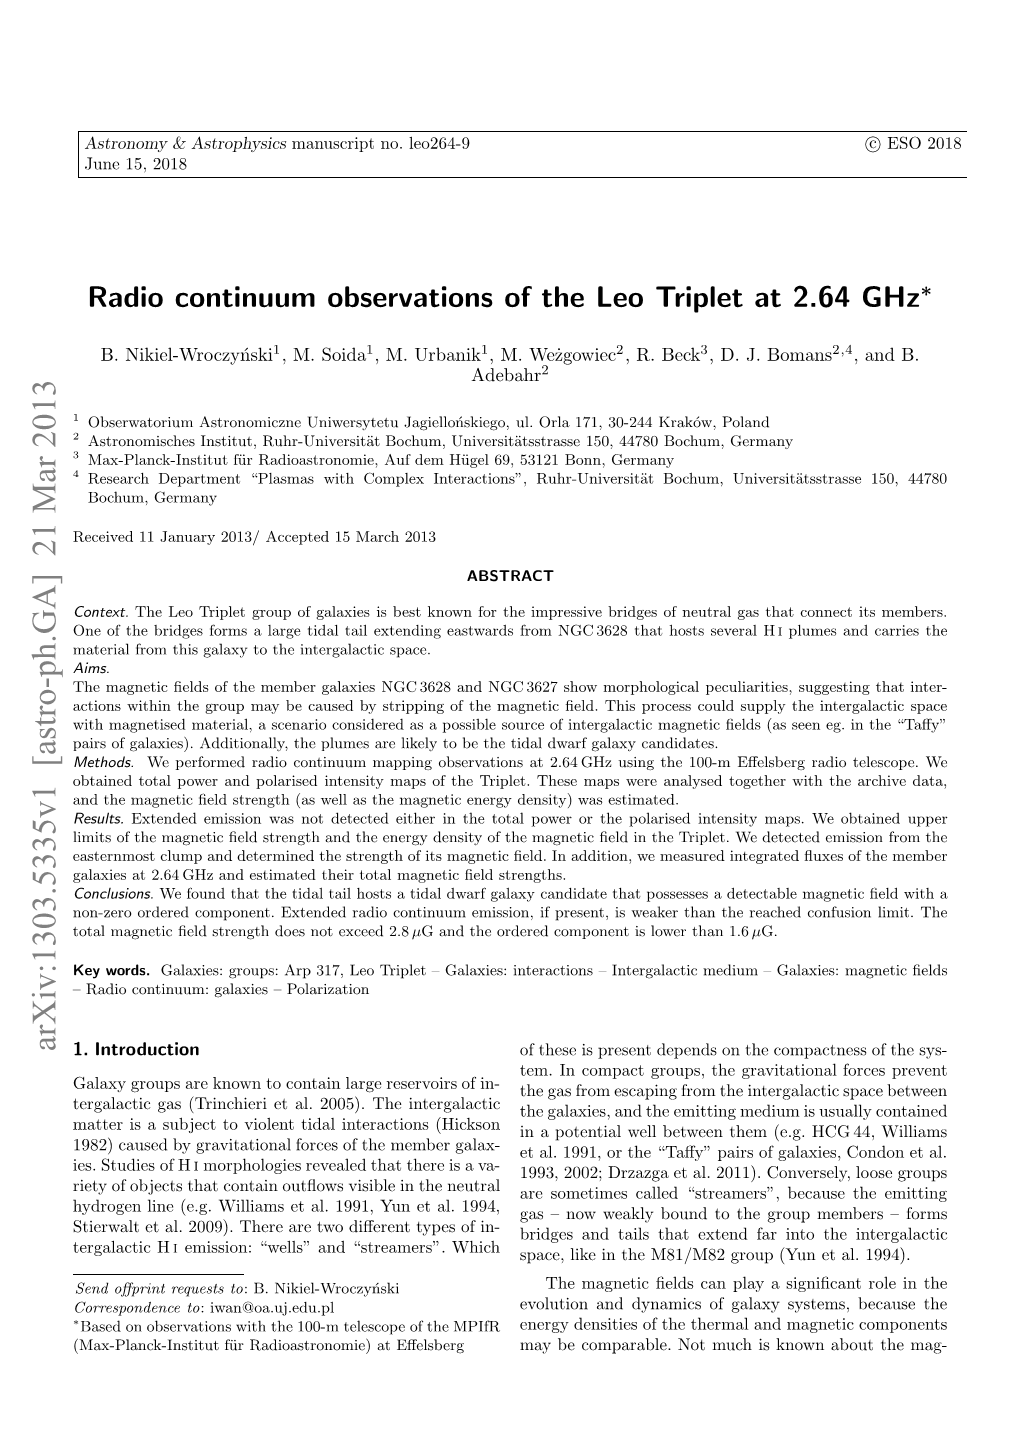 Radio Continuum Observations of the Leo Triplet at 2.64